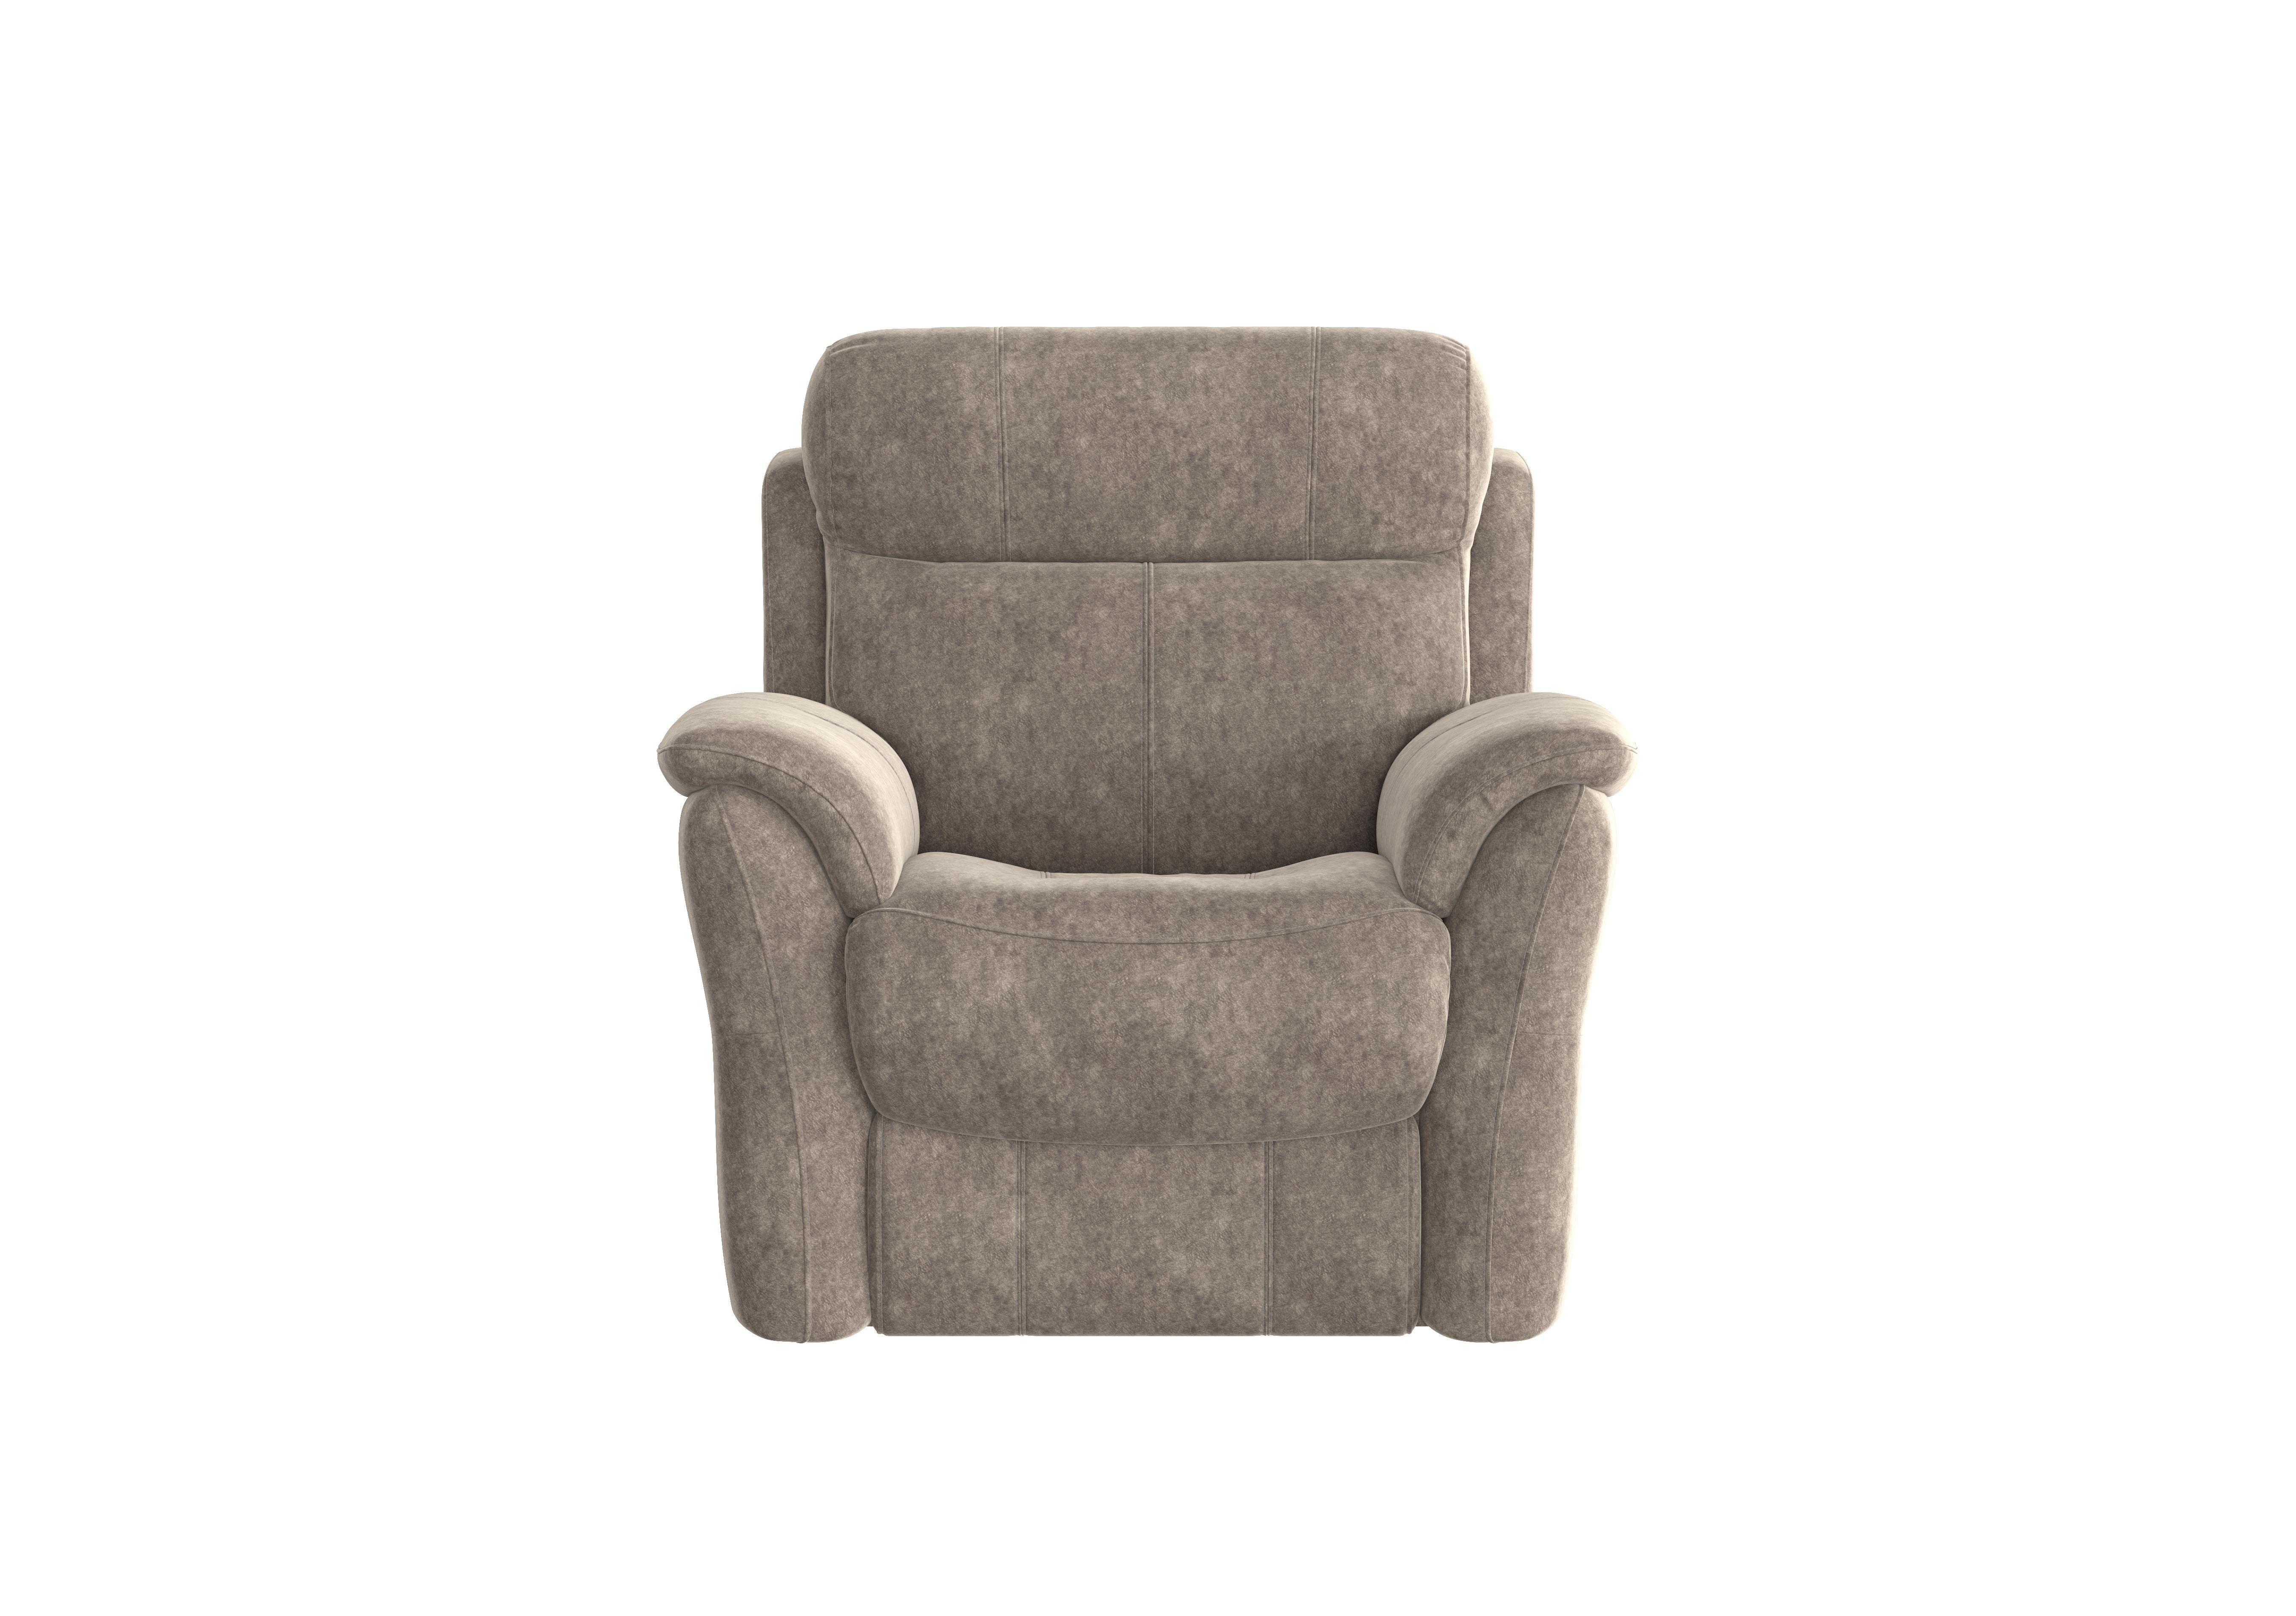 Relax Station Revive Fabric Armchair in Bfa-Bnn-R29 Fv1 Mink on Furniture Village